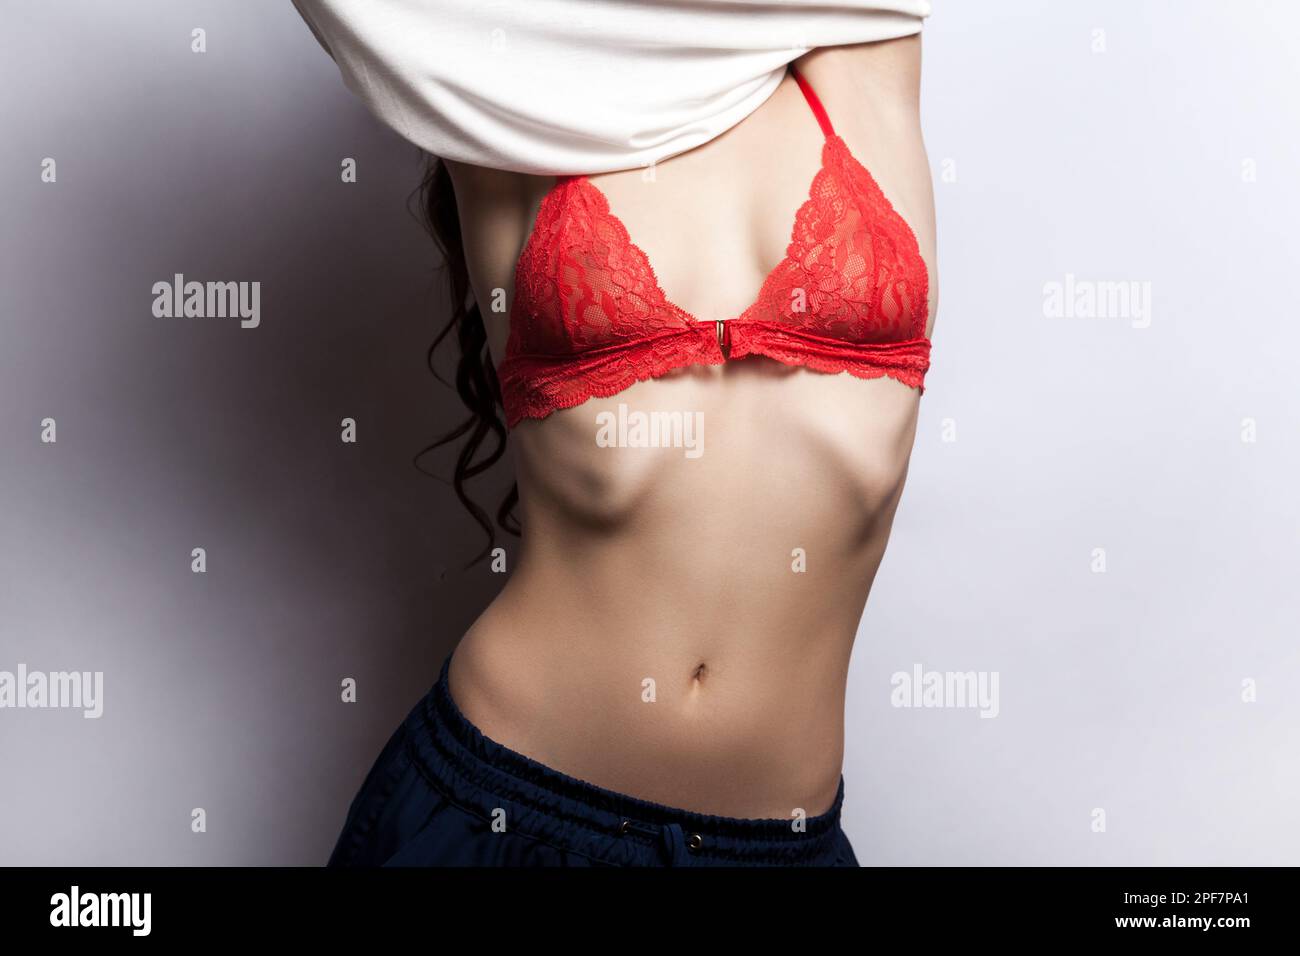 https://c8.alamy.com/comp/2PF7PA1/portrait-of-unknown-woman-sensuality-model-taking-off-her-shirt-showing-her-beautiful-perfect-body-and-red-sexy-lingerie-indoor-shot-isolated-on-gray-background-2PF7PA1.jpg